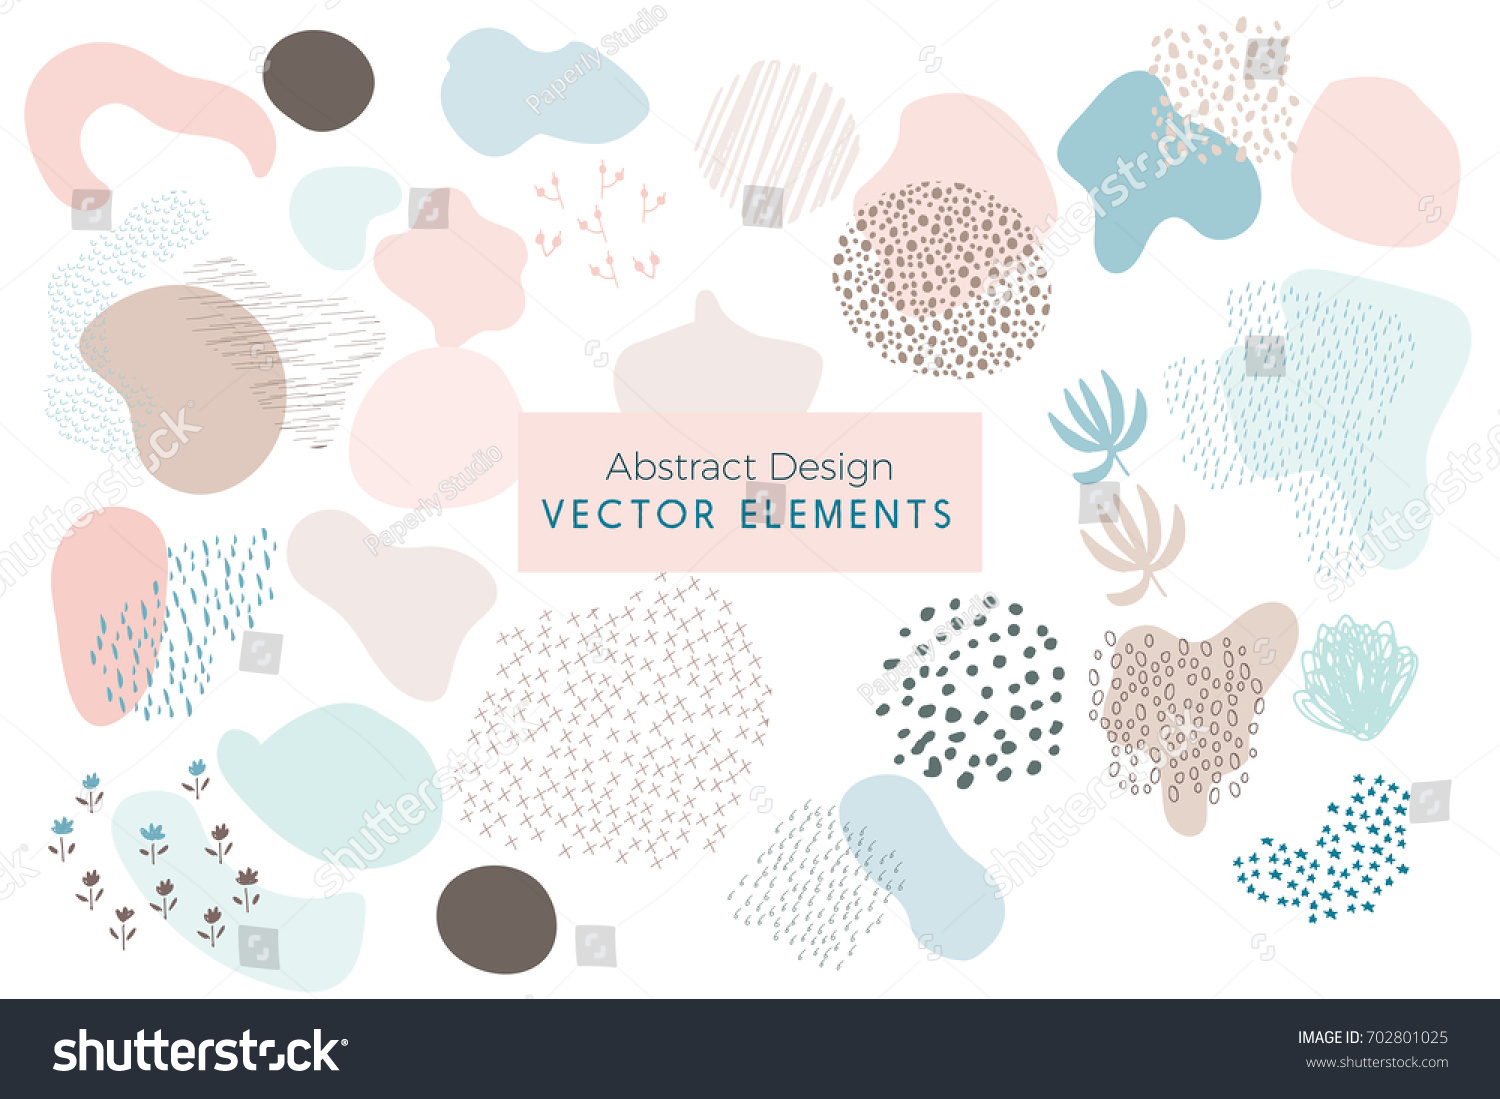 Set of Vector Abstract Brush Strokes, Hand Drawn Design Elements, Organic Shapes, Abstract Backgrounds #702801025